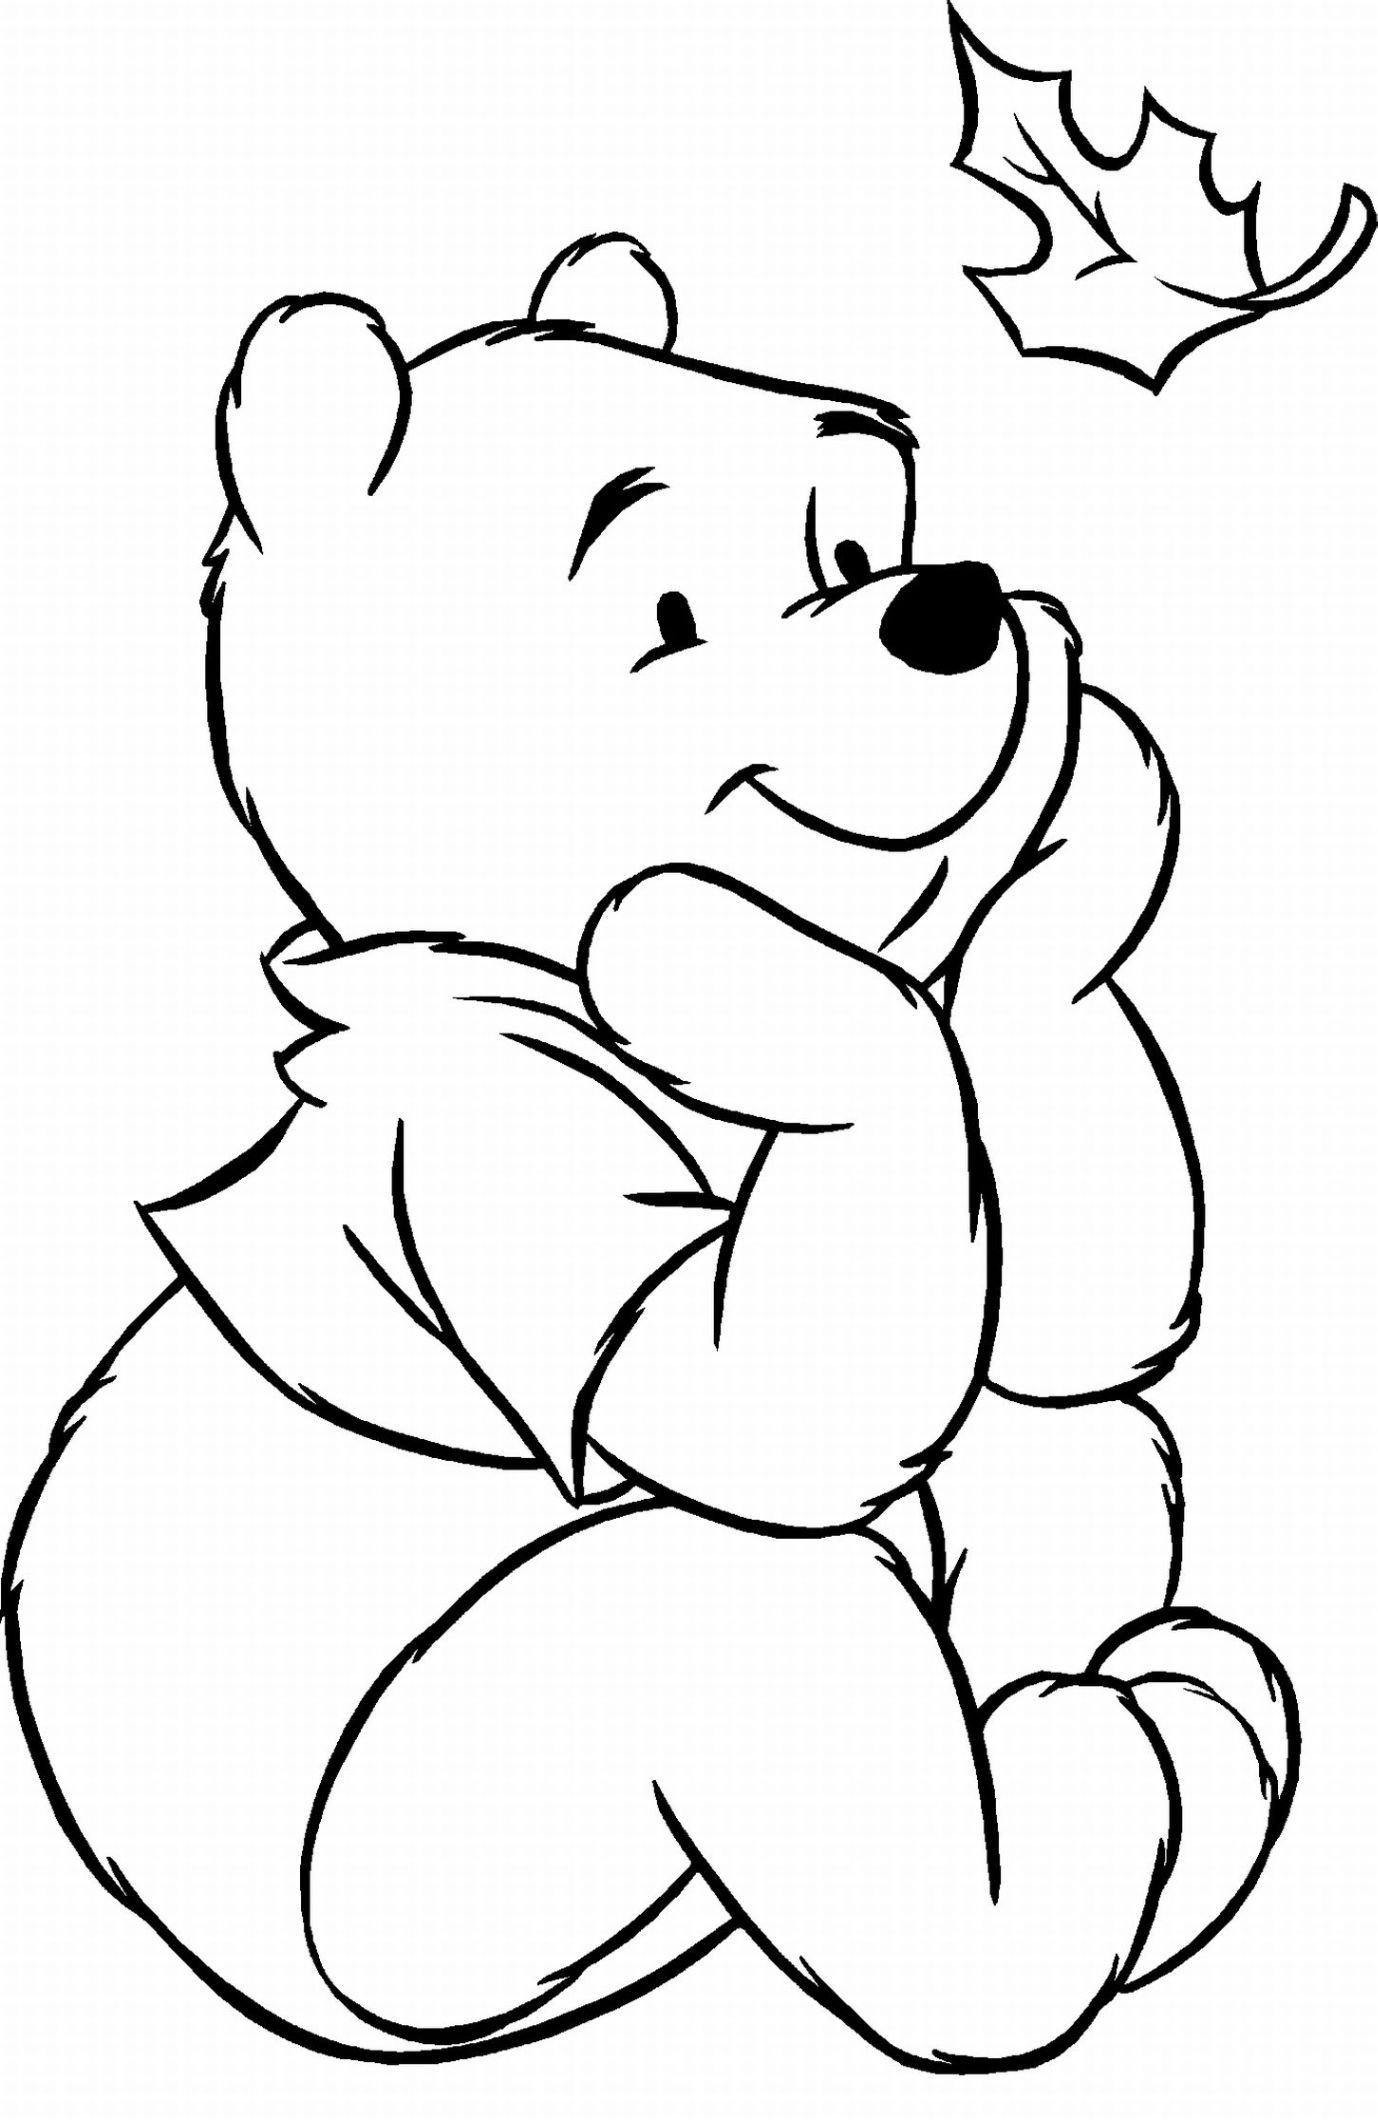 Kids Disney Coloring Pages
 Free Coloring Pages Disney For Kids Image 3